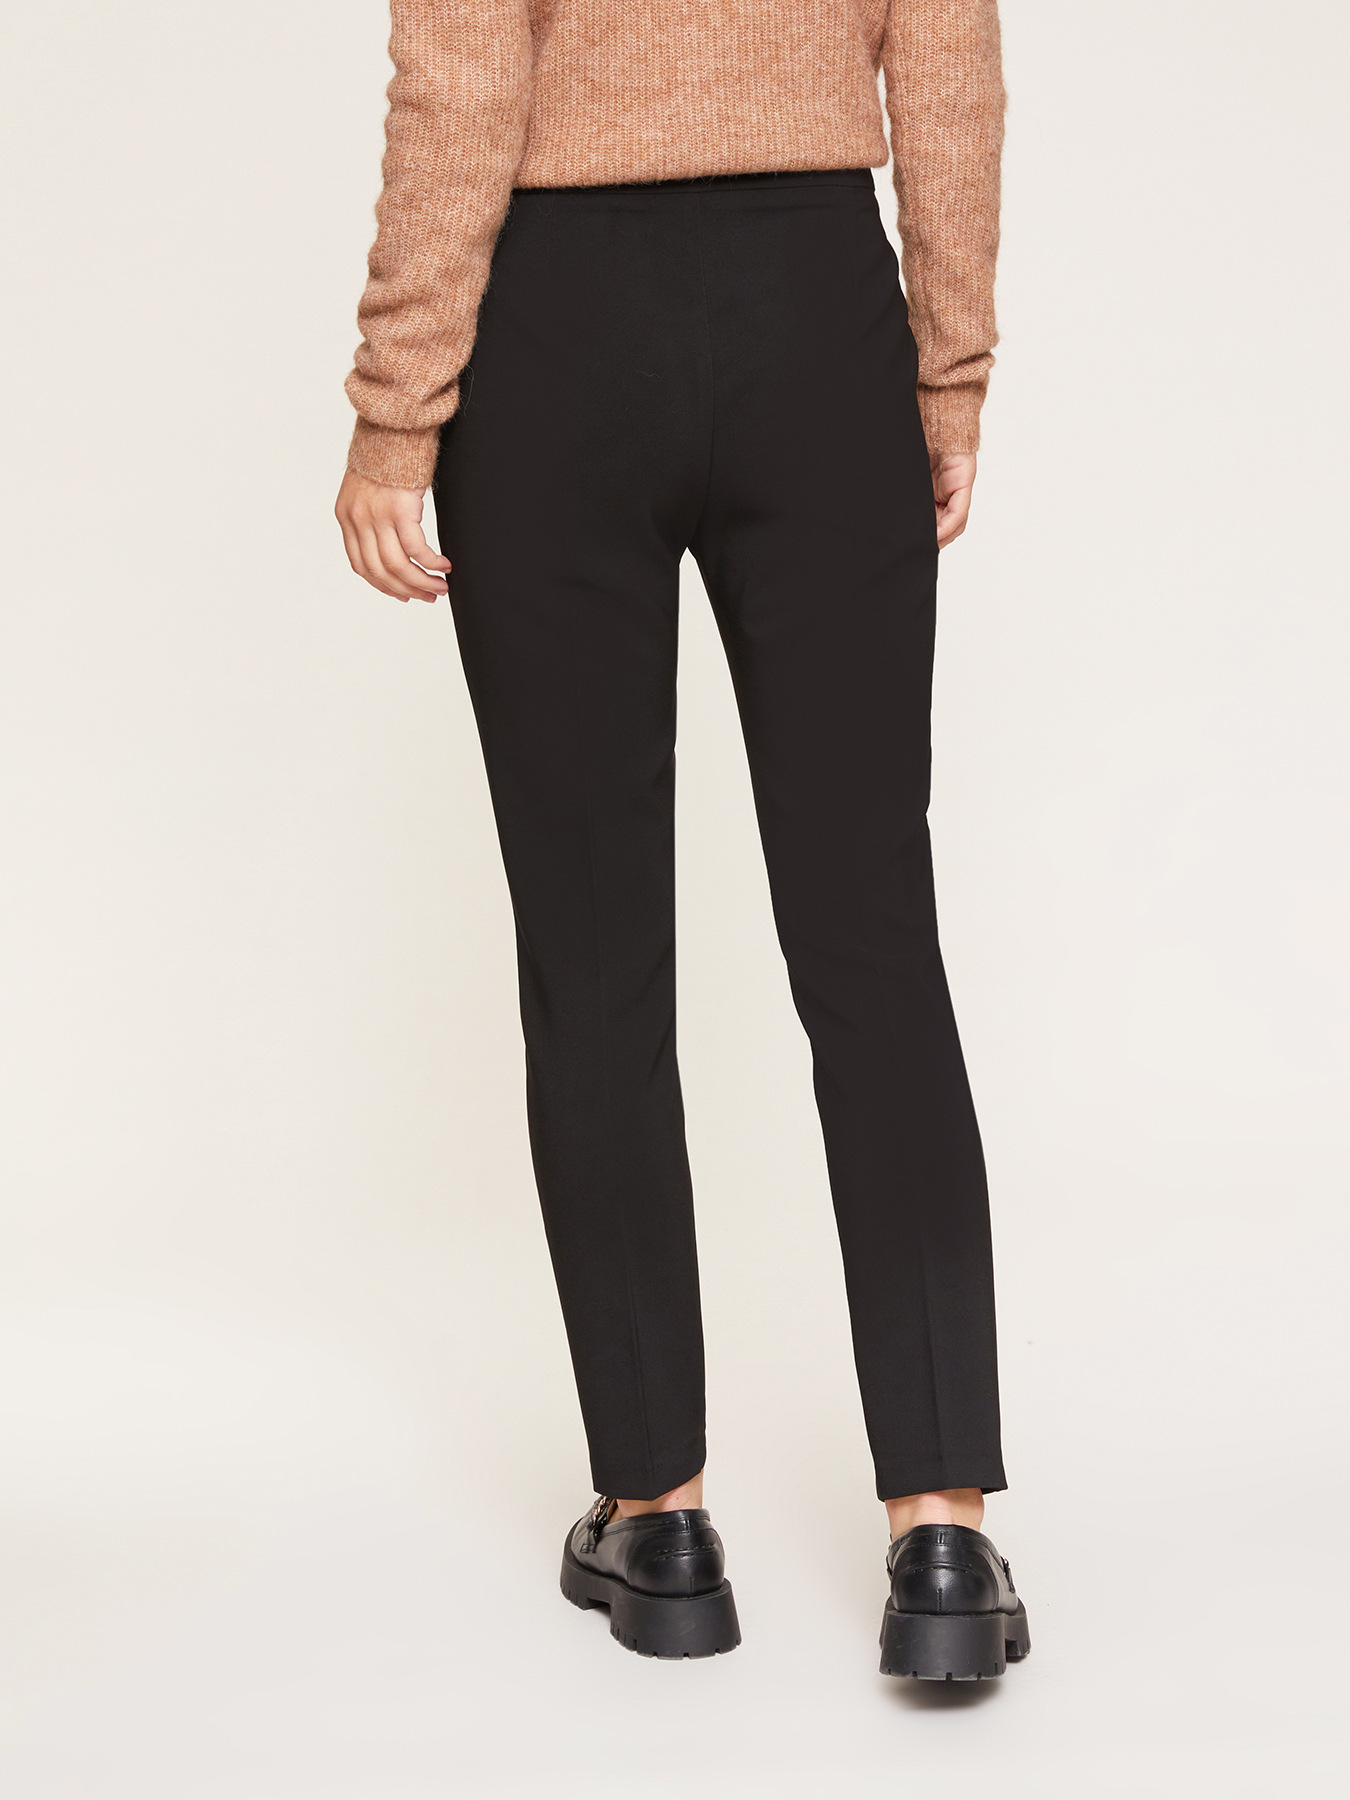 Sporty chic trousers for women with twisted leg | Haruco-vert